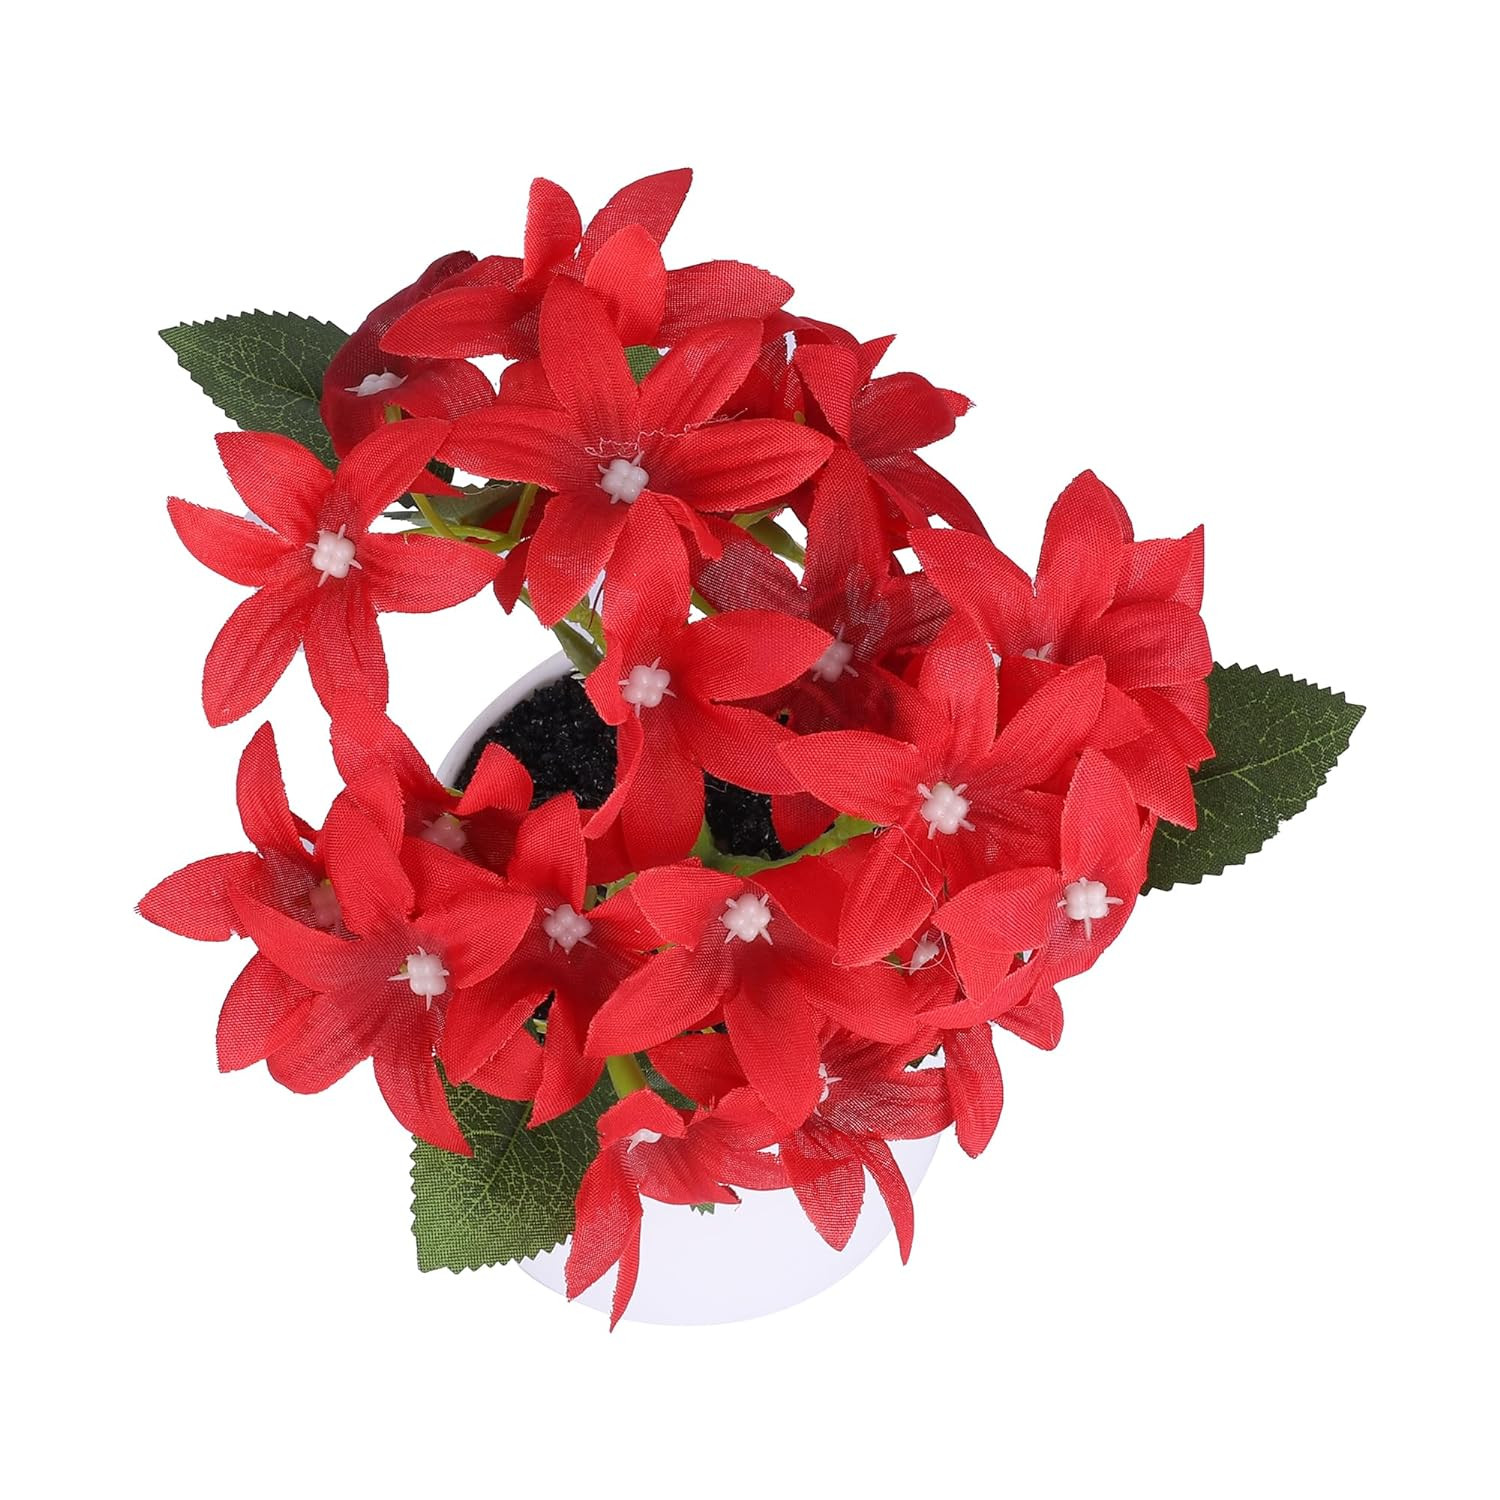 Kuber Industries Artificial Plants for Home DÃ©cor|Natural Looking Indoor Fake Plants with Pot|Artificial Flowers for Decoration (Red)